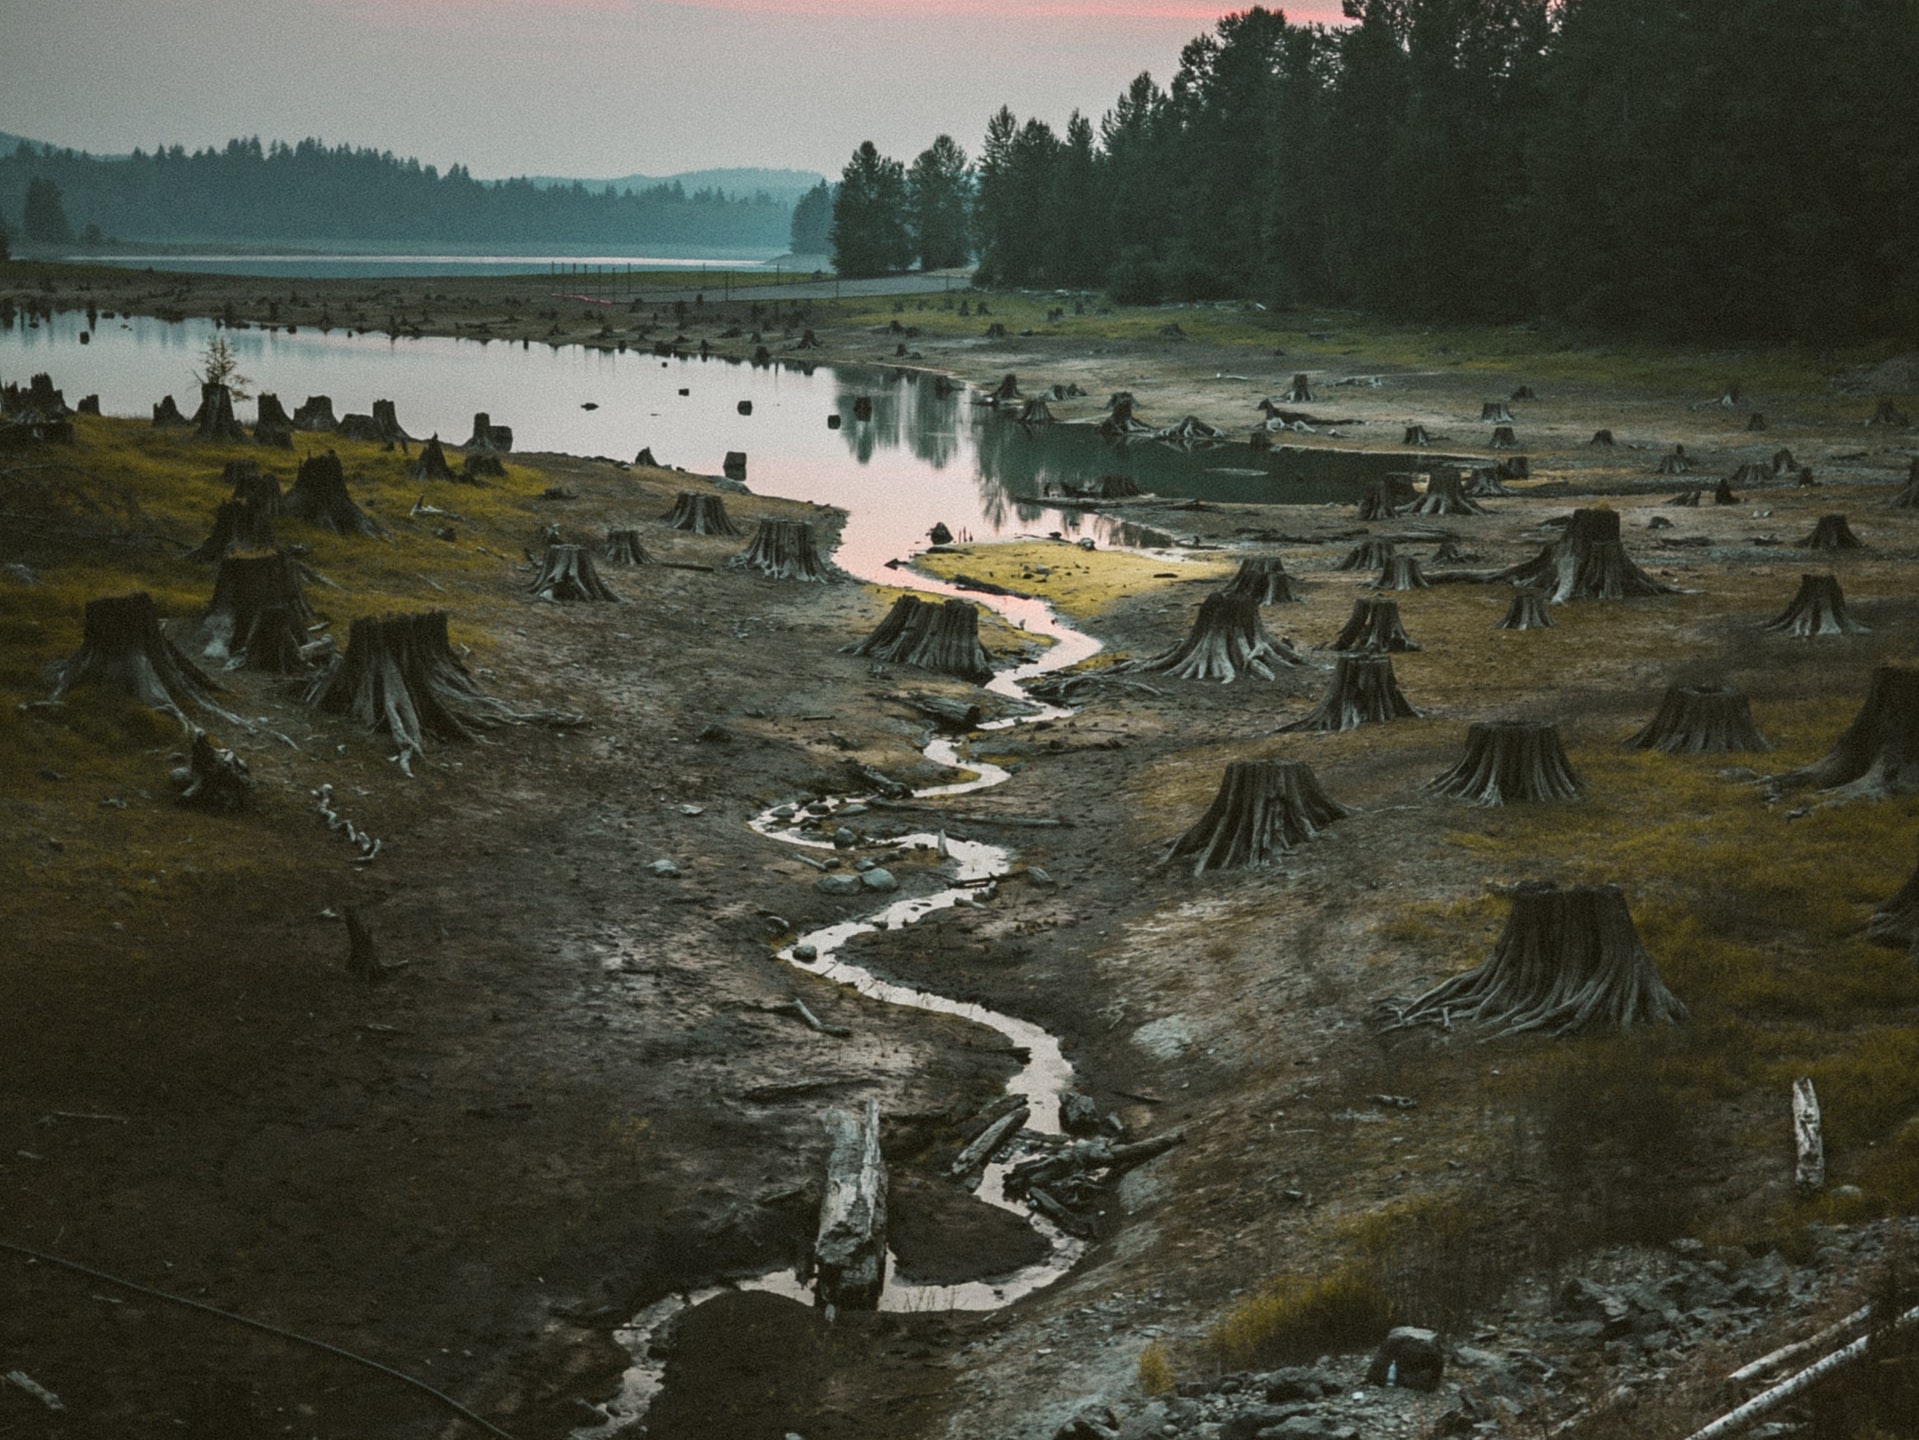 a photo of tree stumps by a body of water